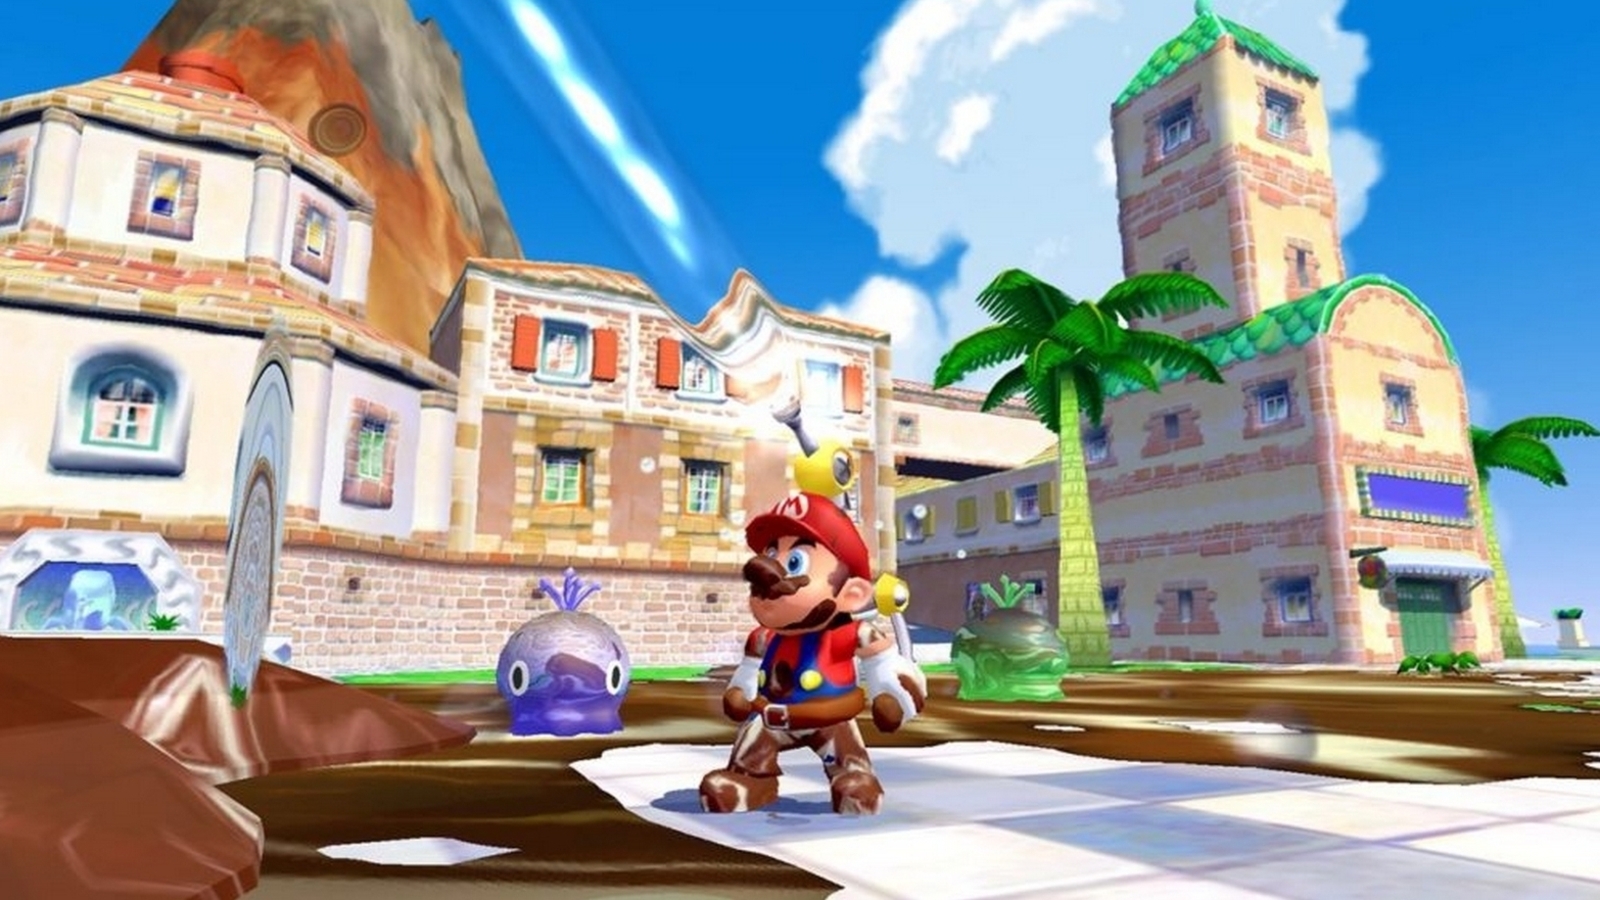 Top 8 Mario Games For GameCube That You Should Definitely Try As A Beginner